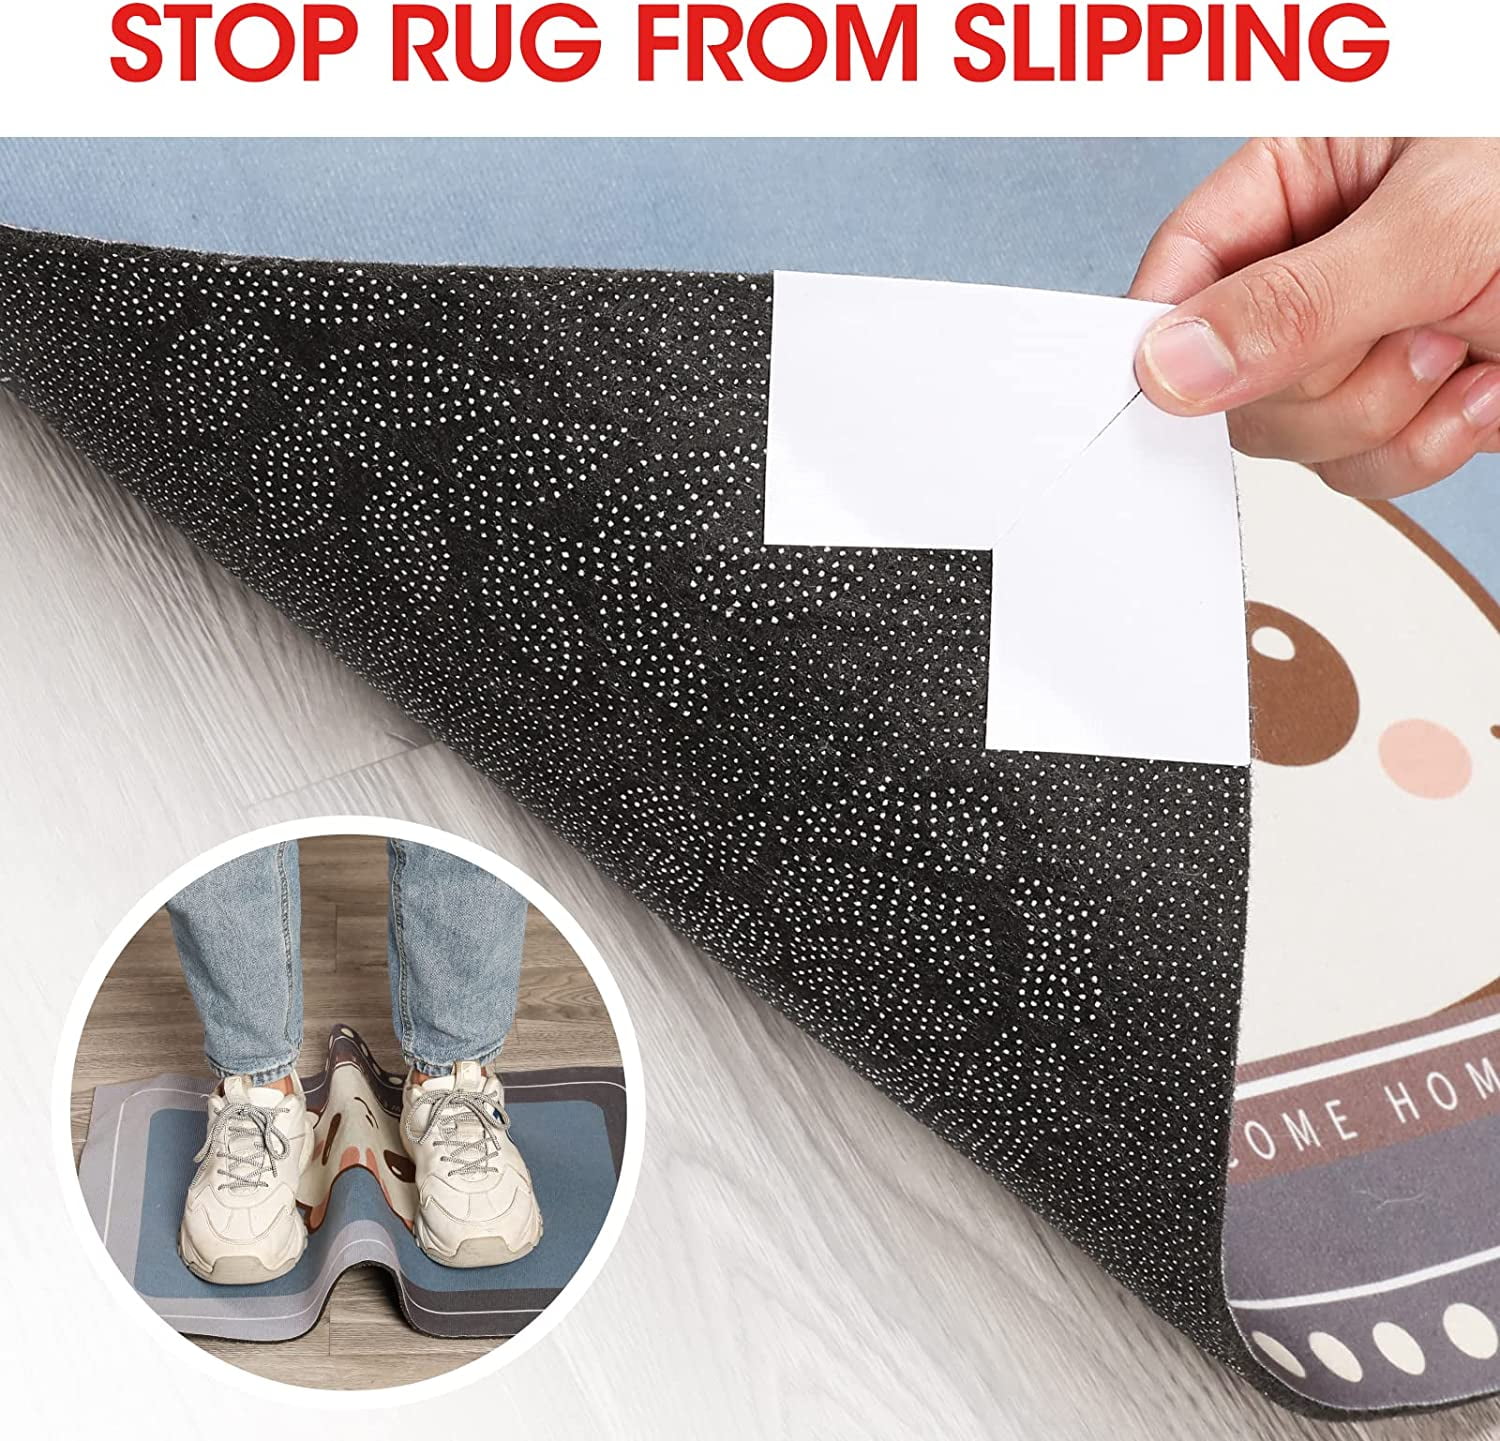 Double sided carpet tape be used to secure a rug on laminate flooring